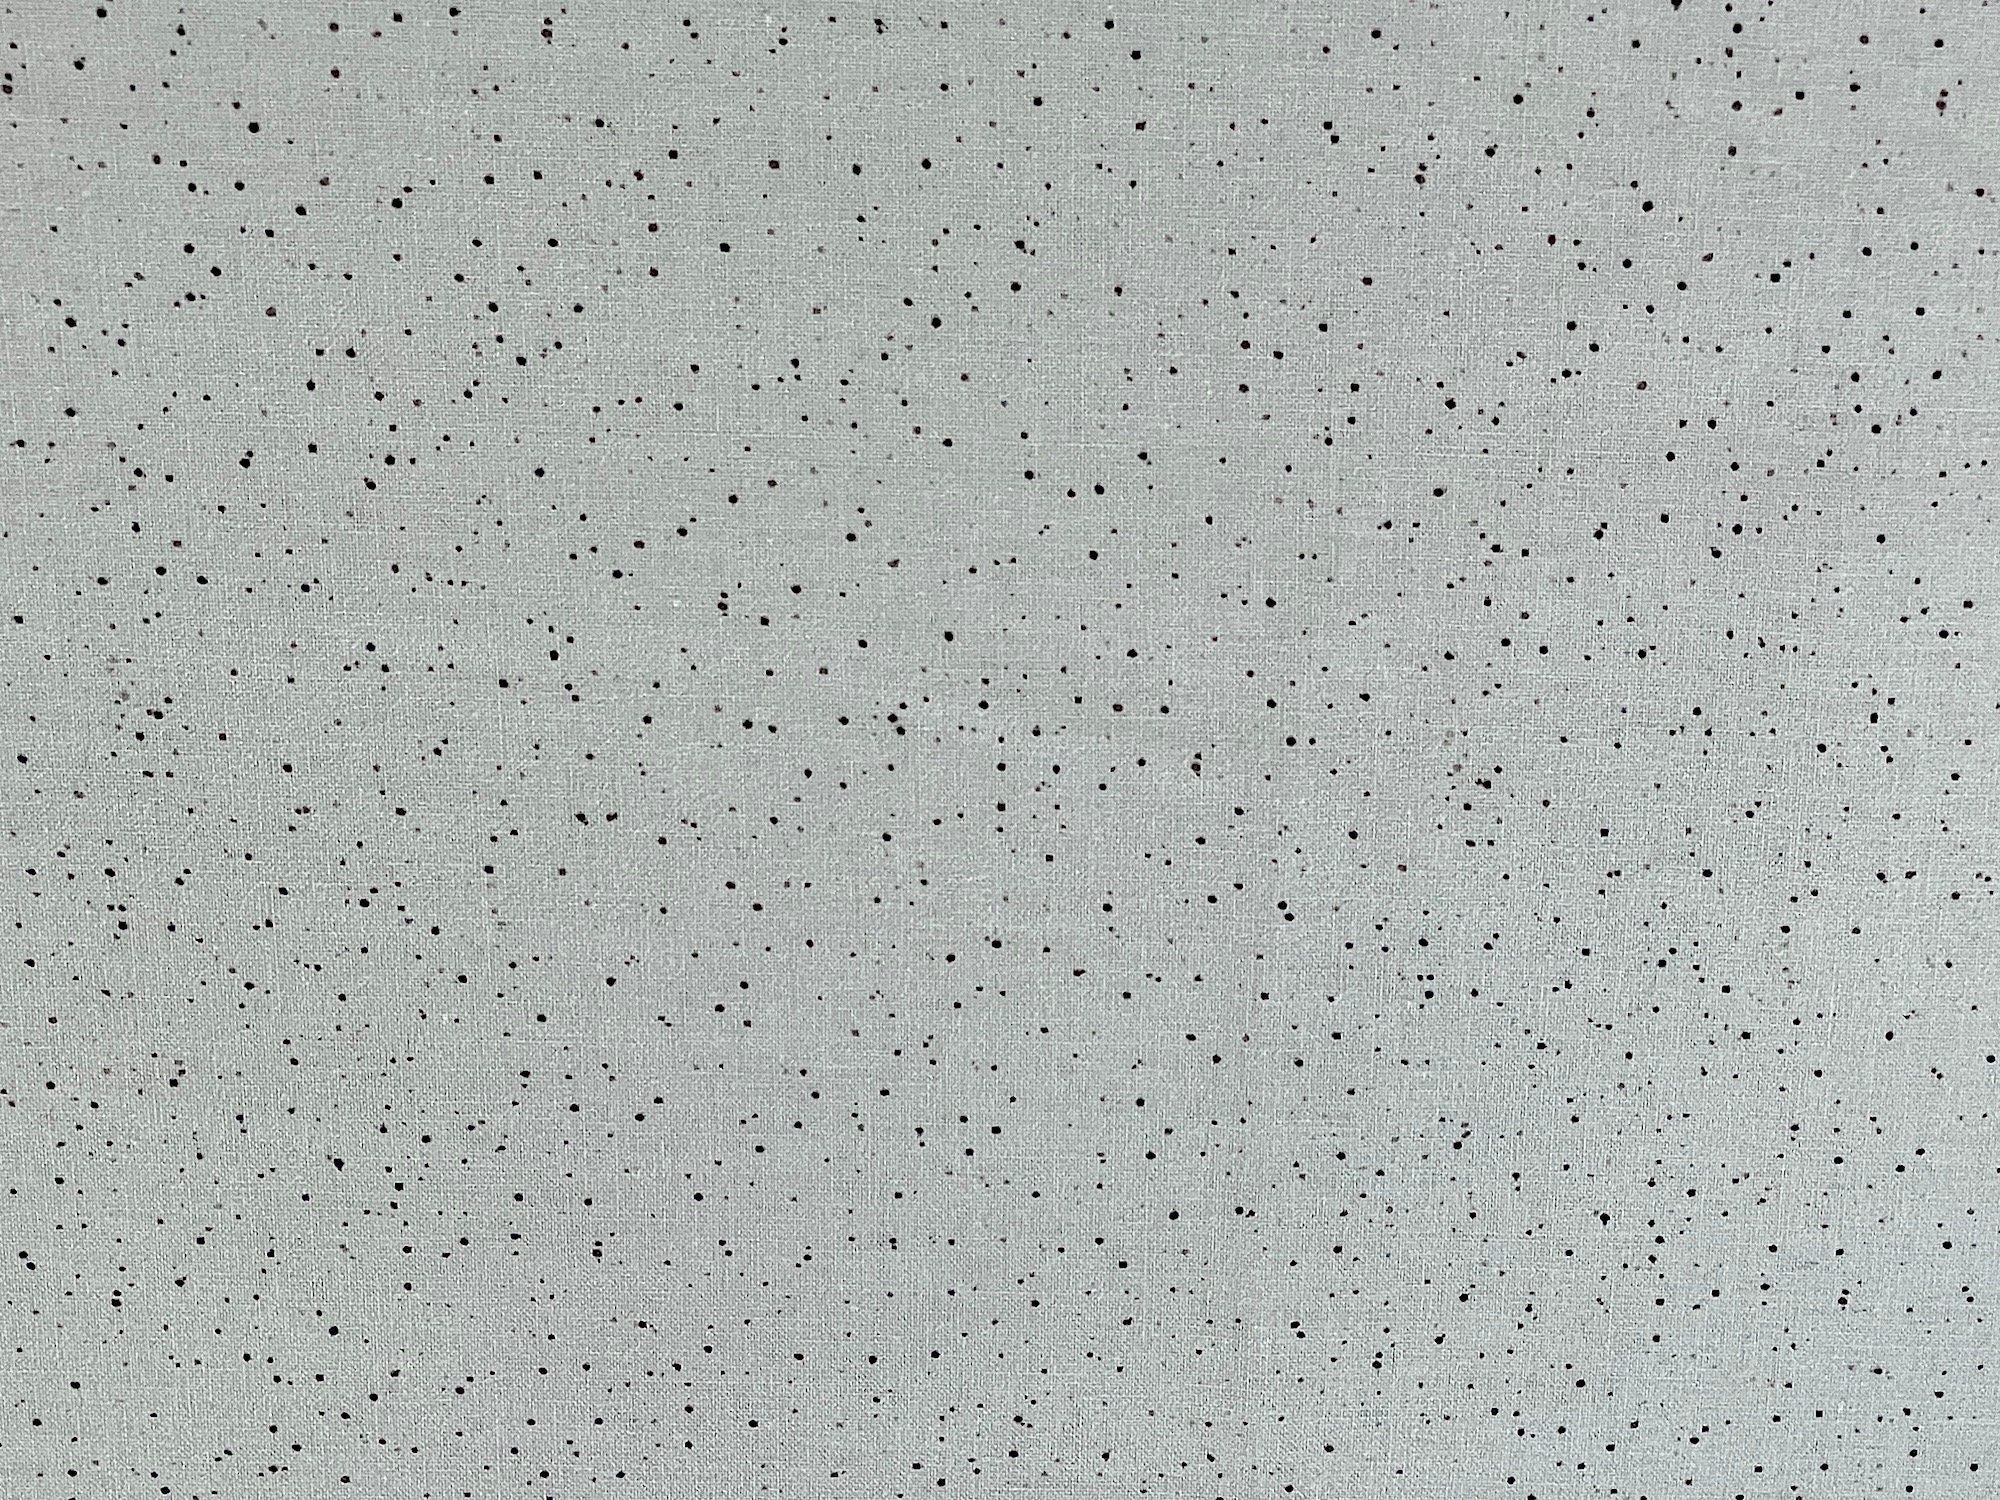 This cotton fabric is part of the Bramble Patch Collection by Hannah Dale. This light grey fabric is covered with splatter dots.